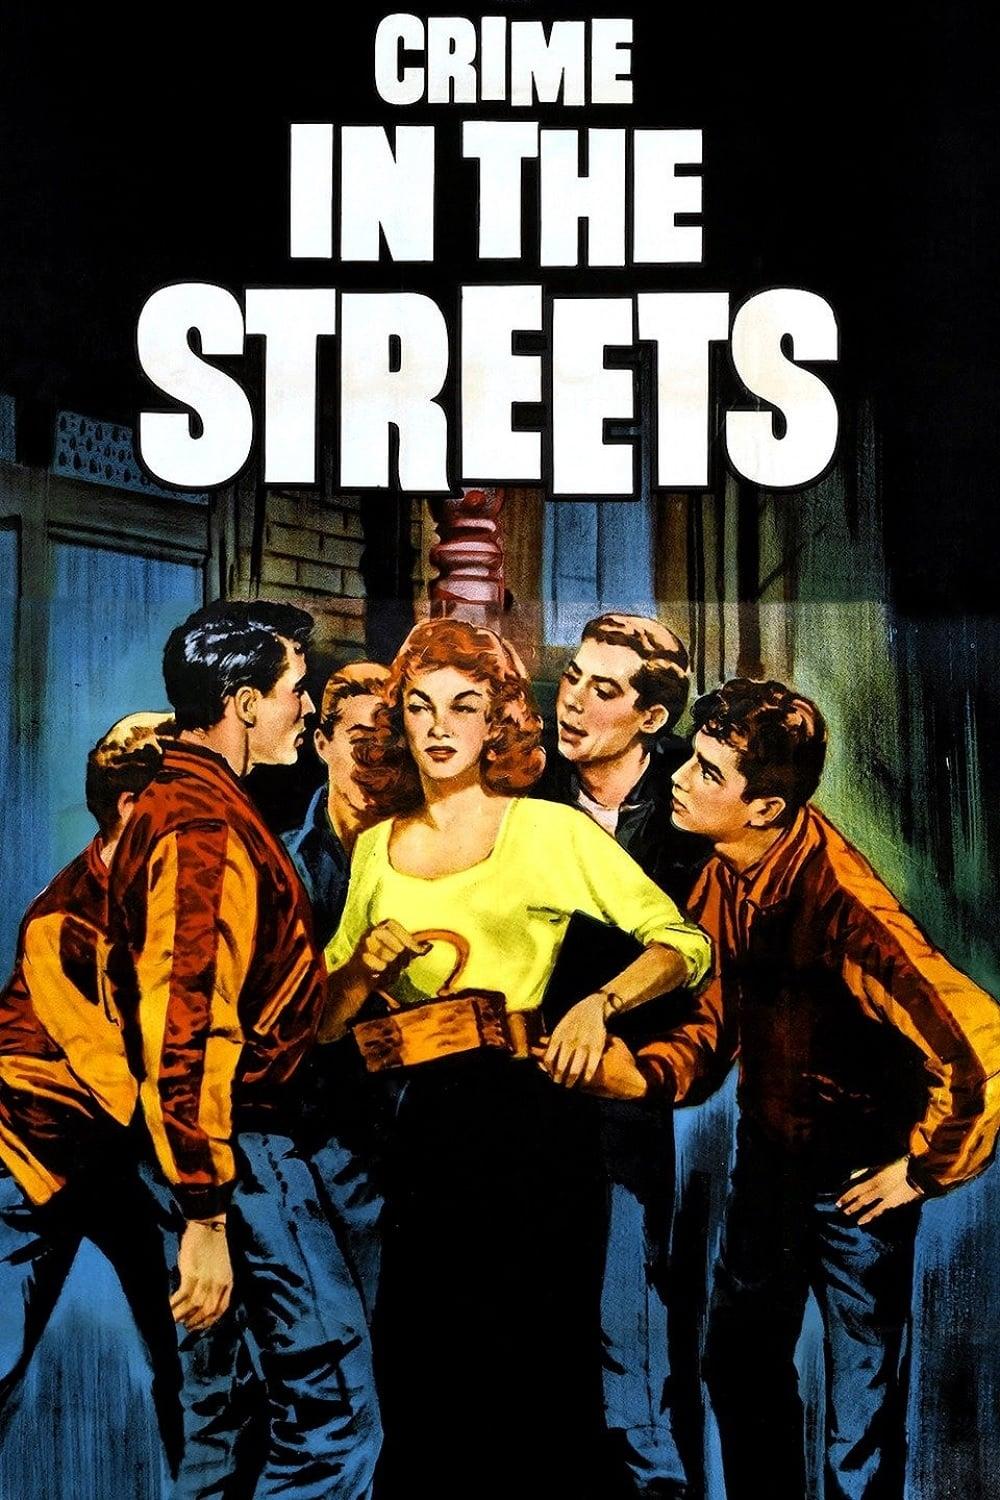 Crime in the Streets poster